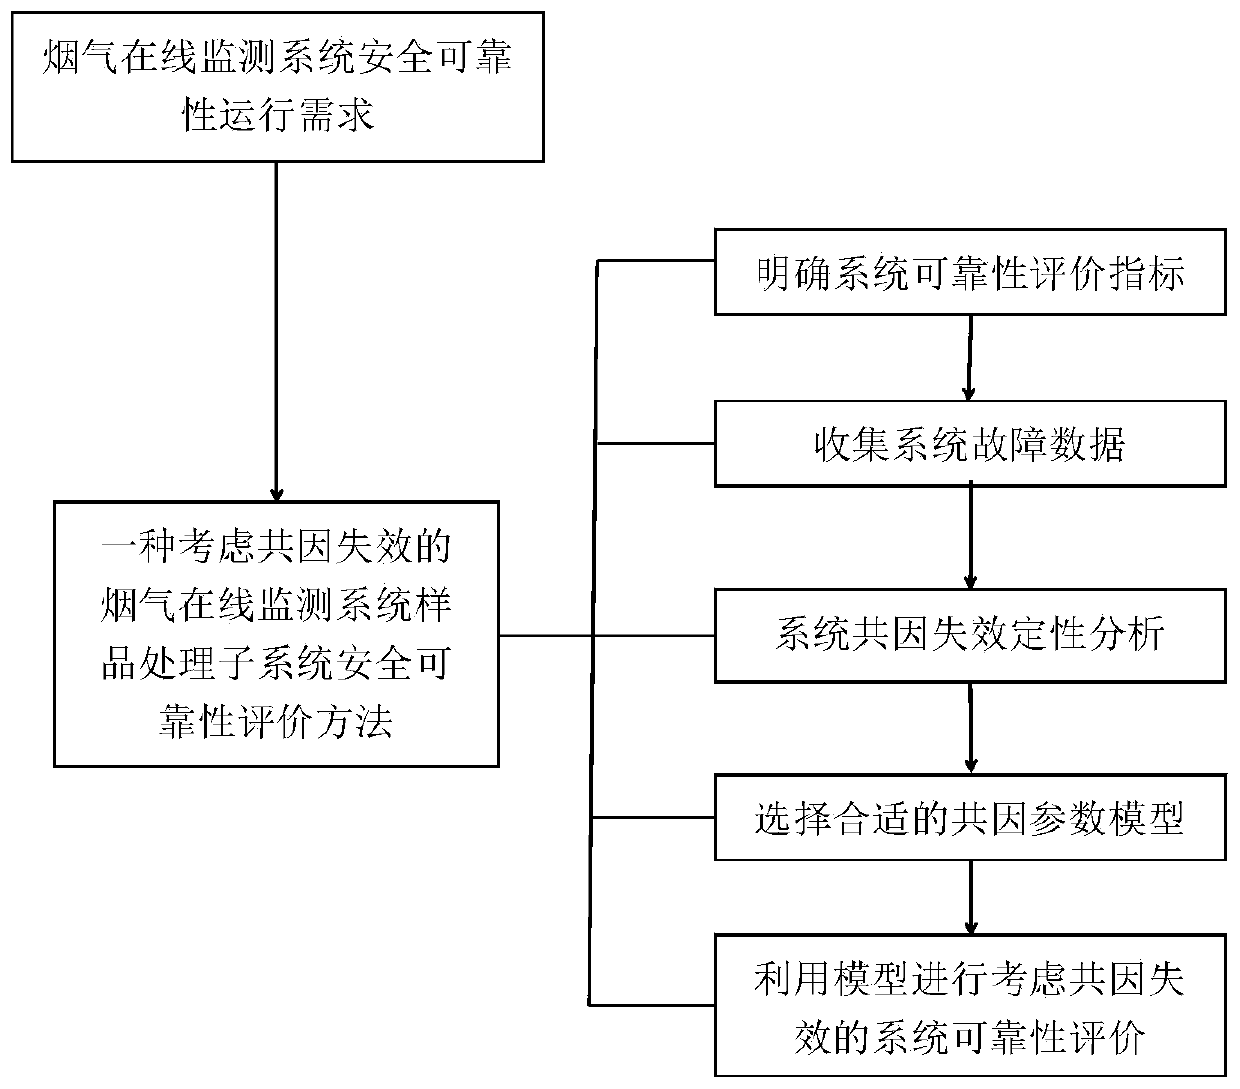 Safety and reliability evaluation method for flue gas online monitoring system with consideration of common cause failure